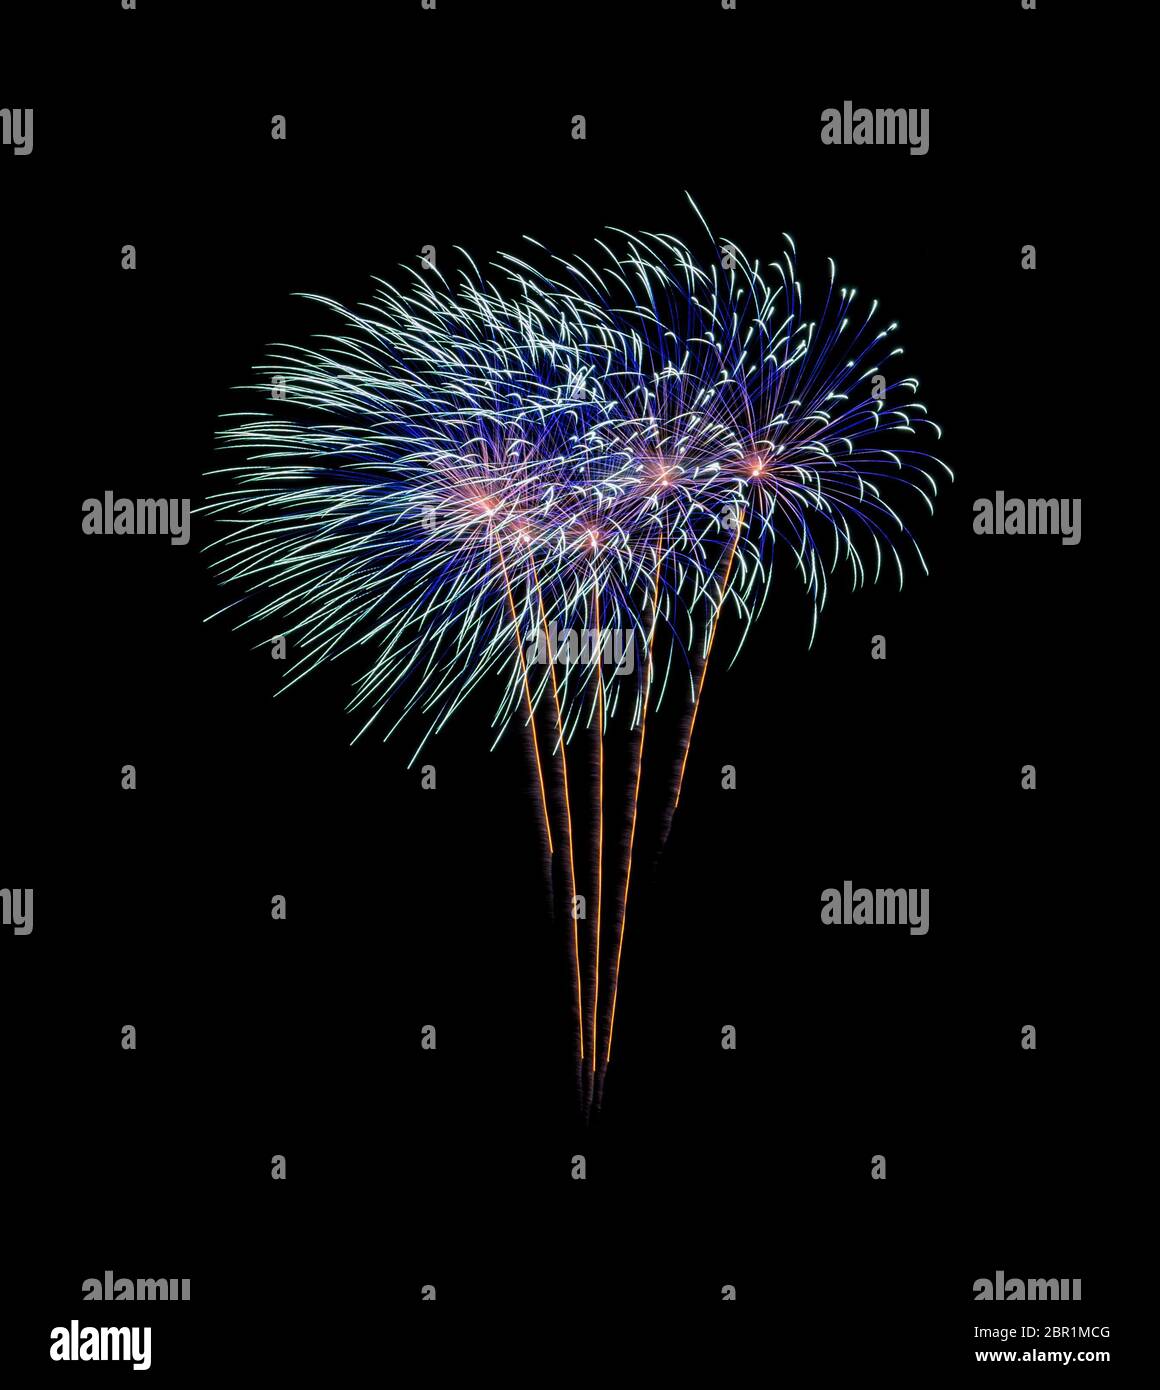 Colorful exploded fireworks display,  isolated on black background Stock Photo